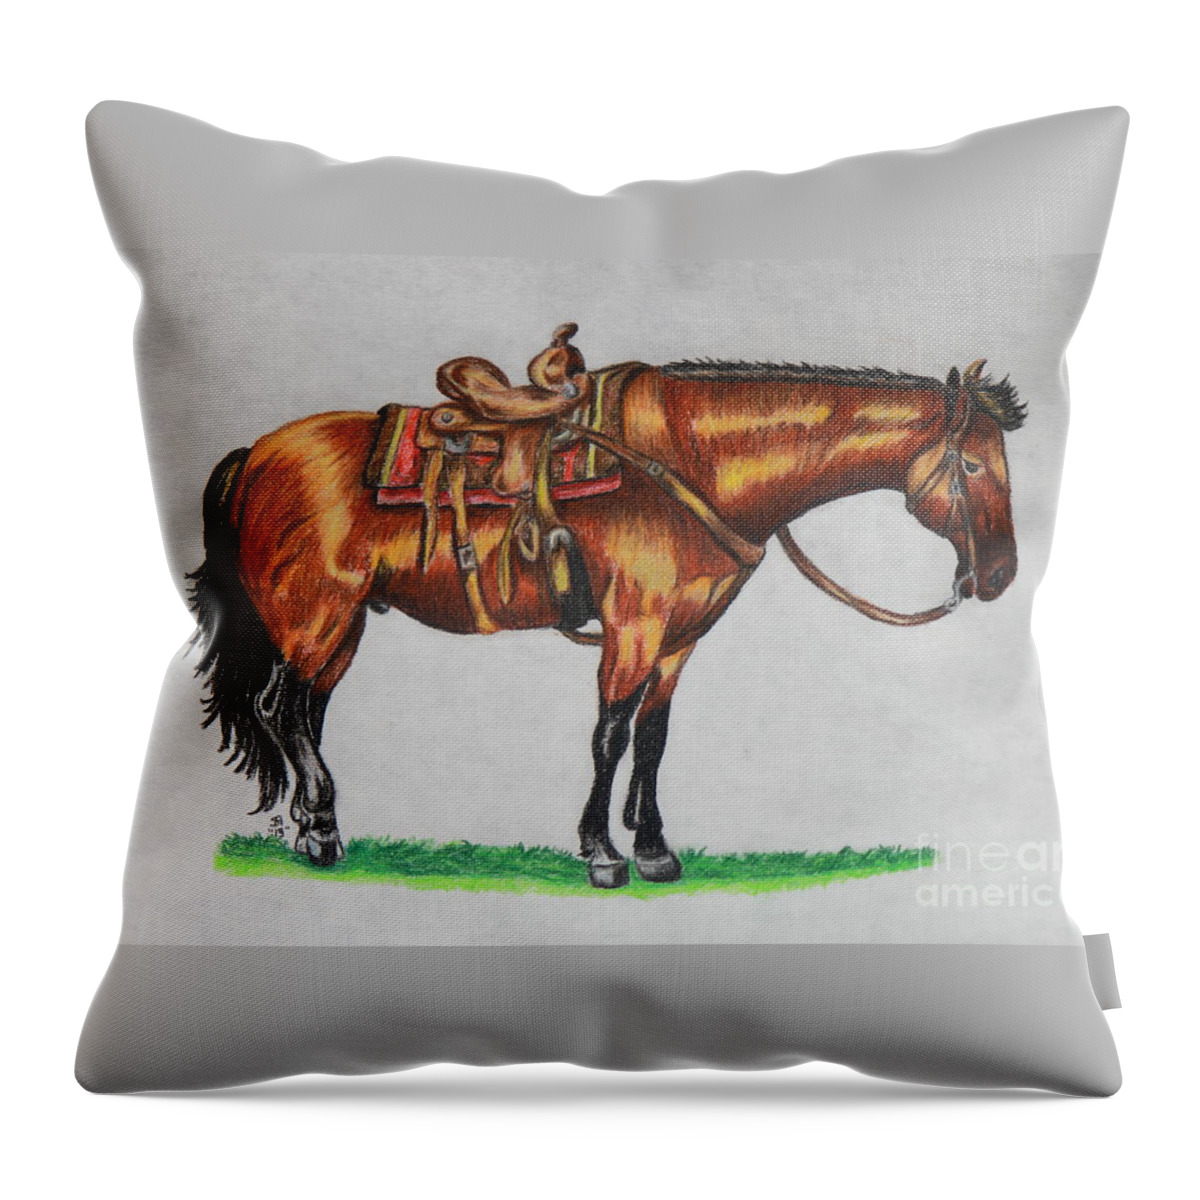 Horse Throw Pillow featuring the drawing Western Horse by Sheri Simmons